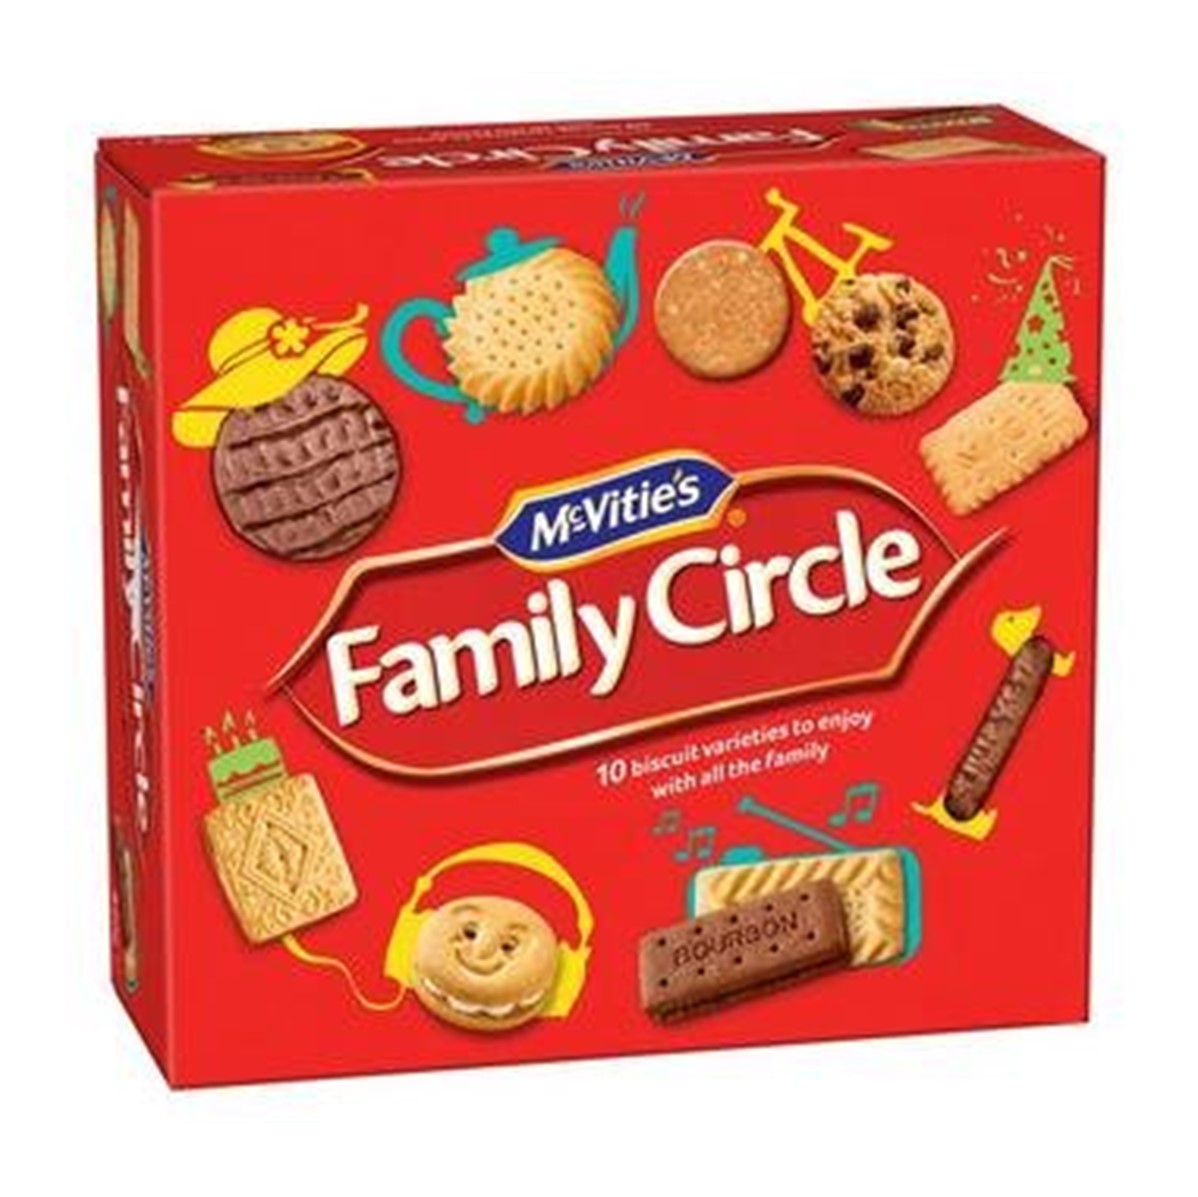 McVitie's Family Circle Variety Biscuits - 620g carton **